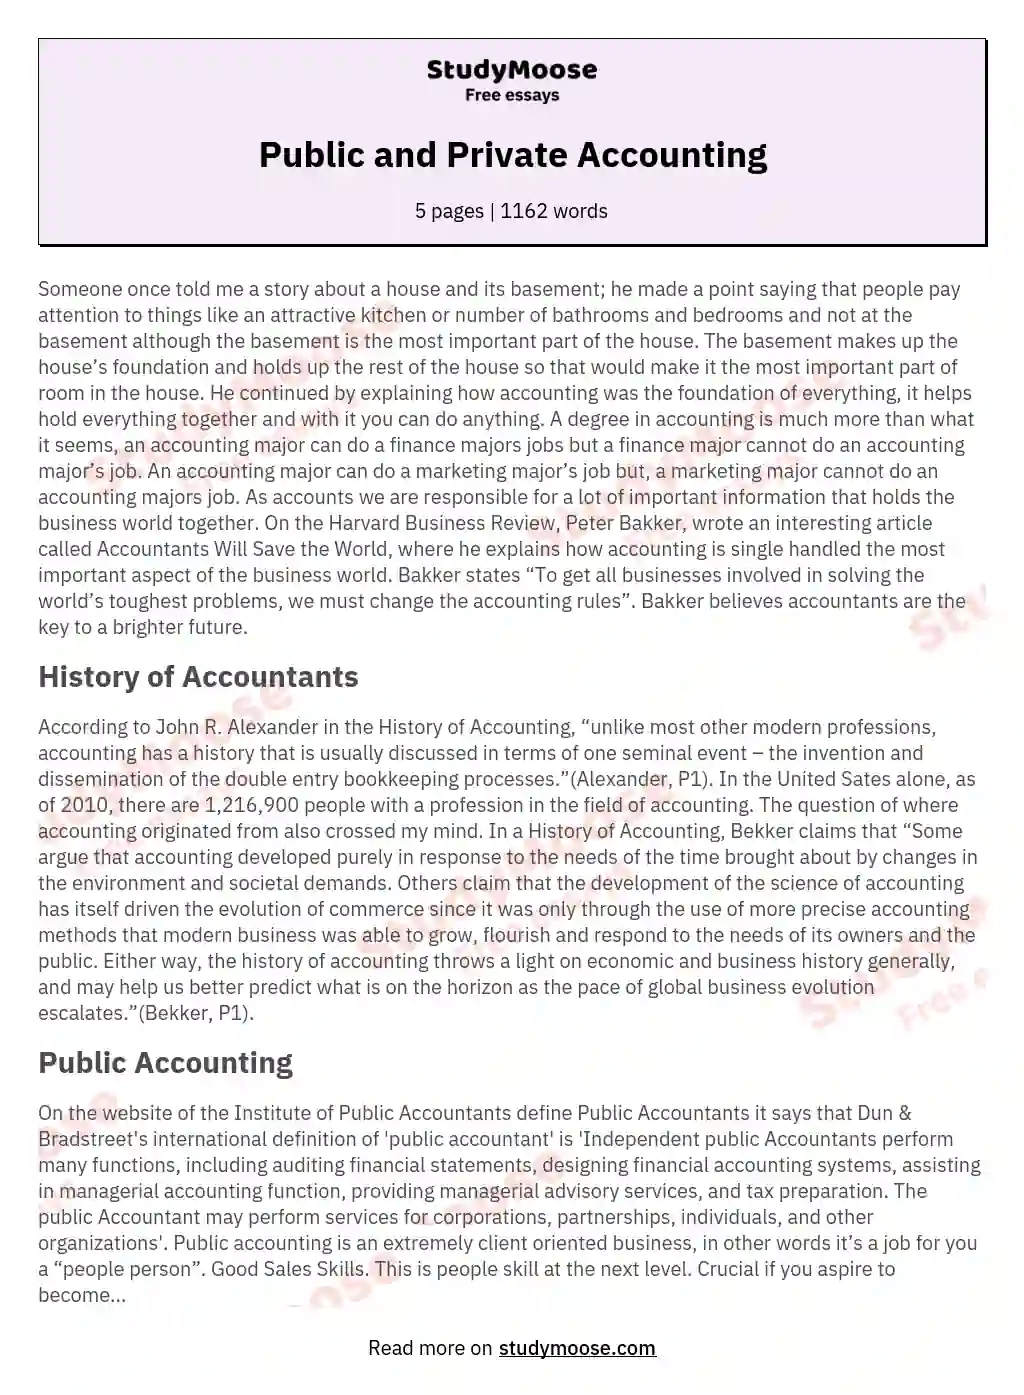 Public and Private Accounting essay